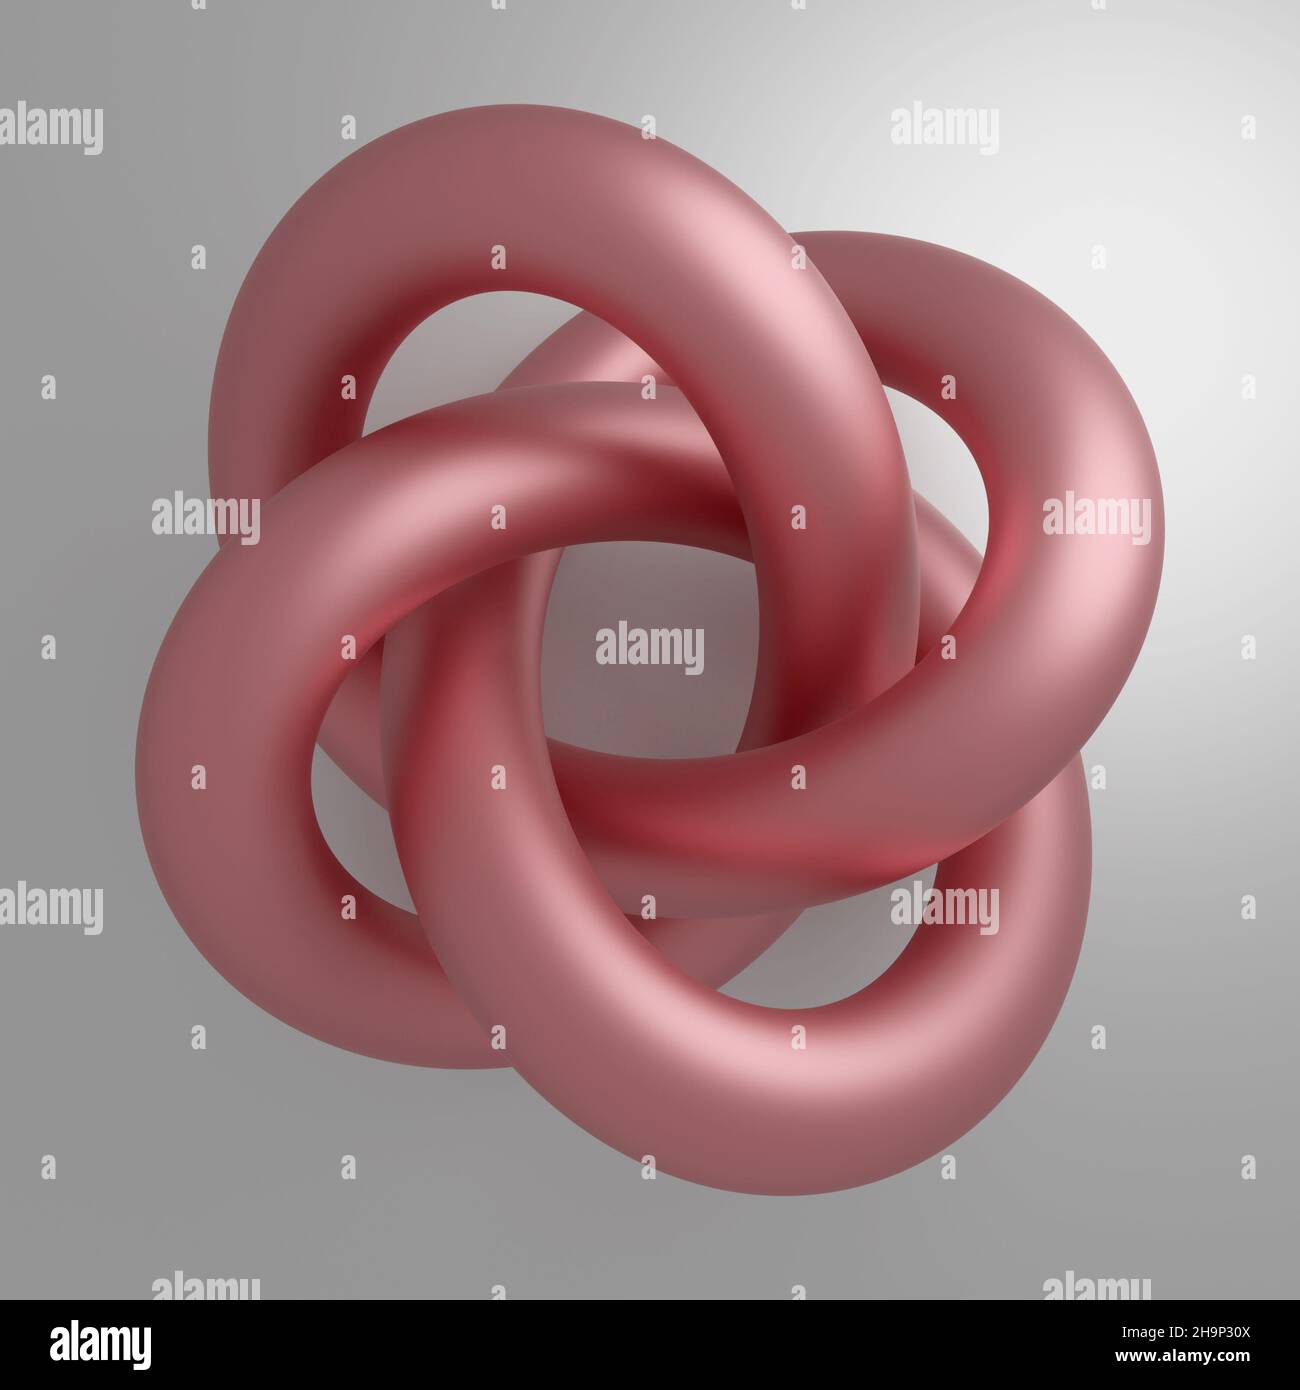 Copper wire tied in a knot, on a gray background.. A shiny pink torus intertwined into an endless knot. 3D render. Stock Photo